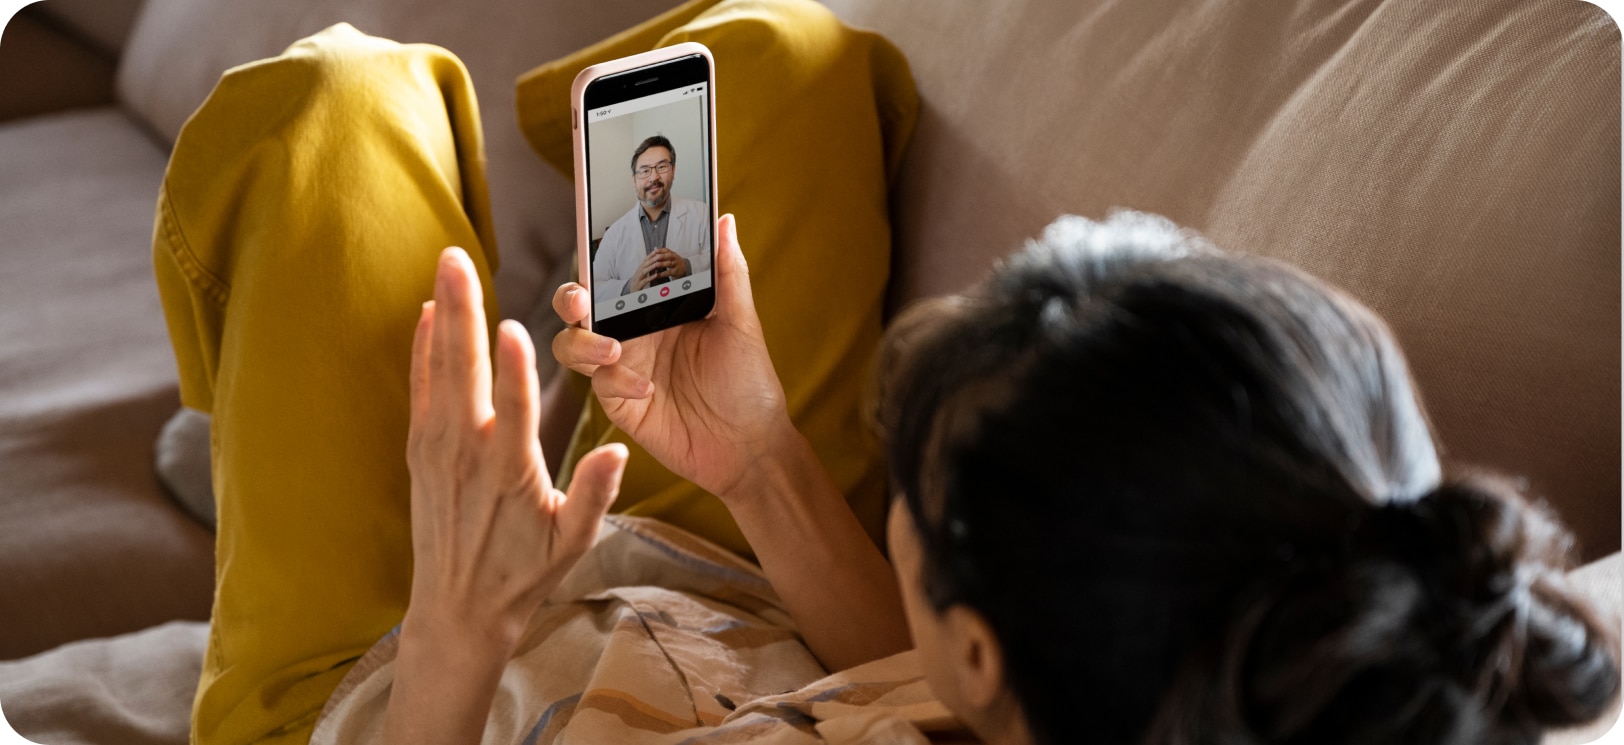 A woman speaks to her doctor on a telehealth call.